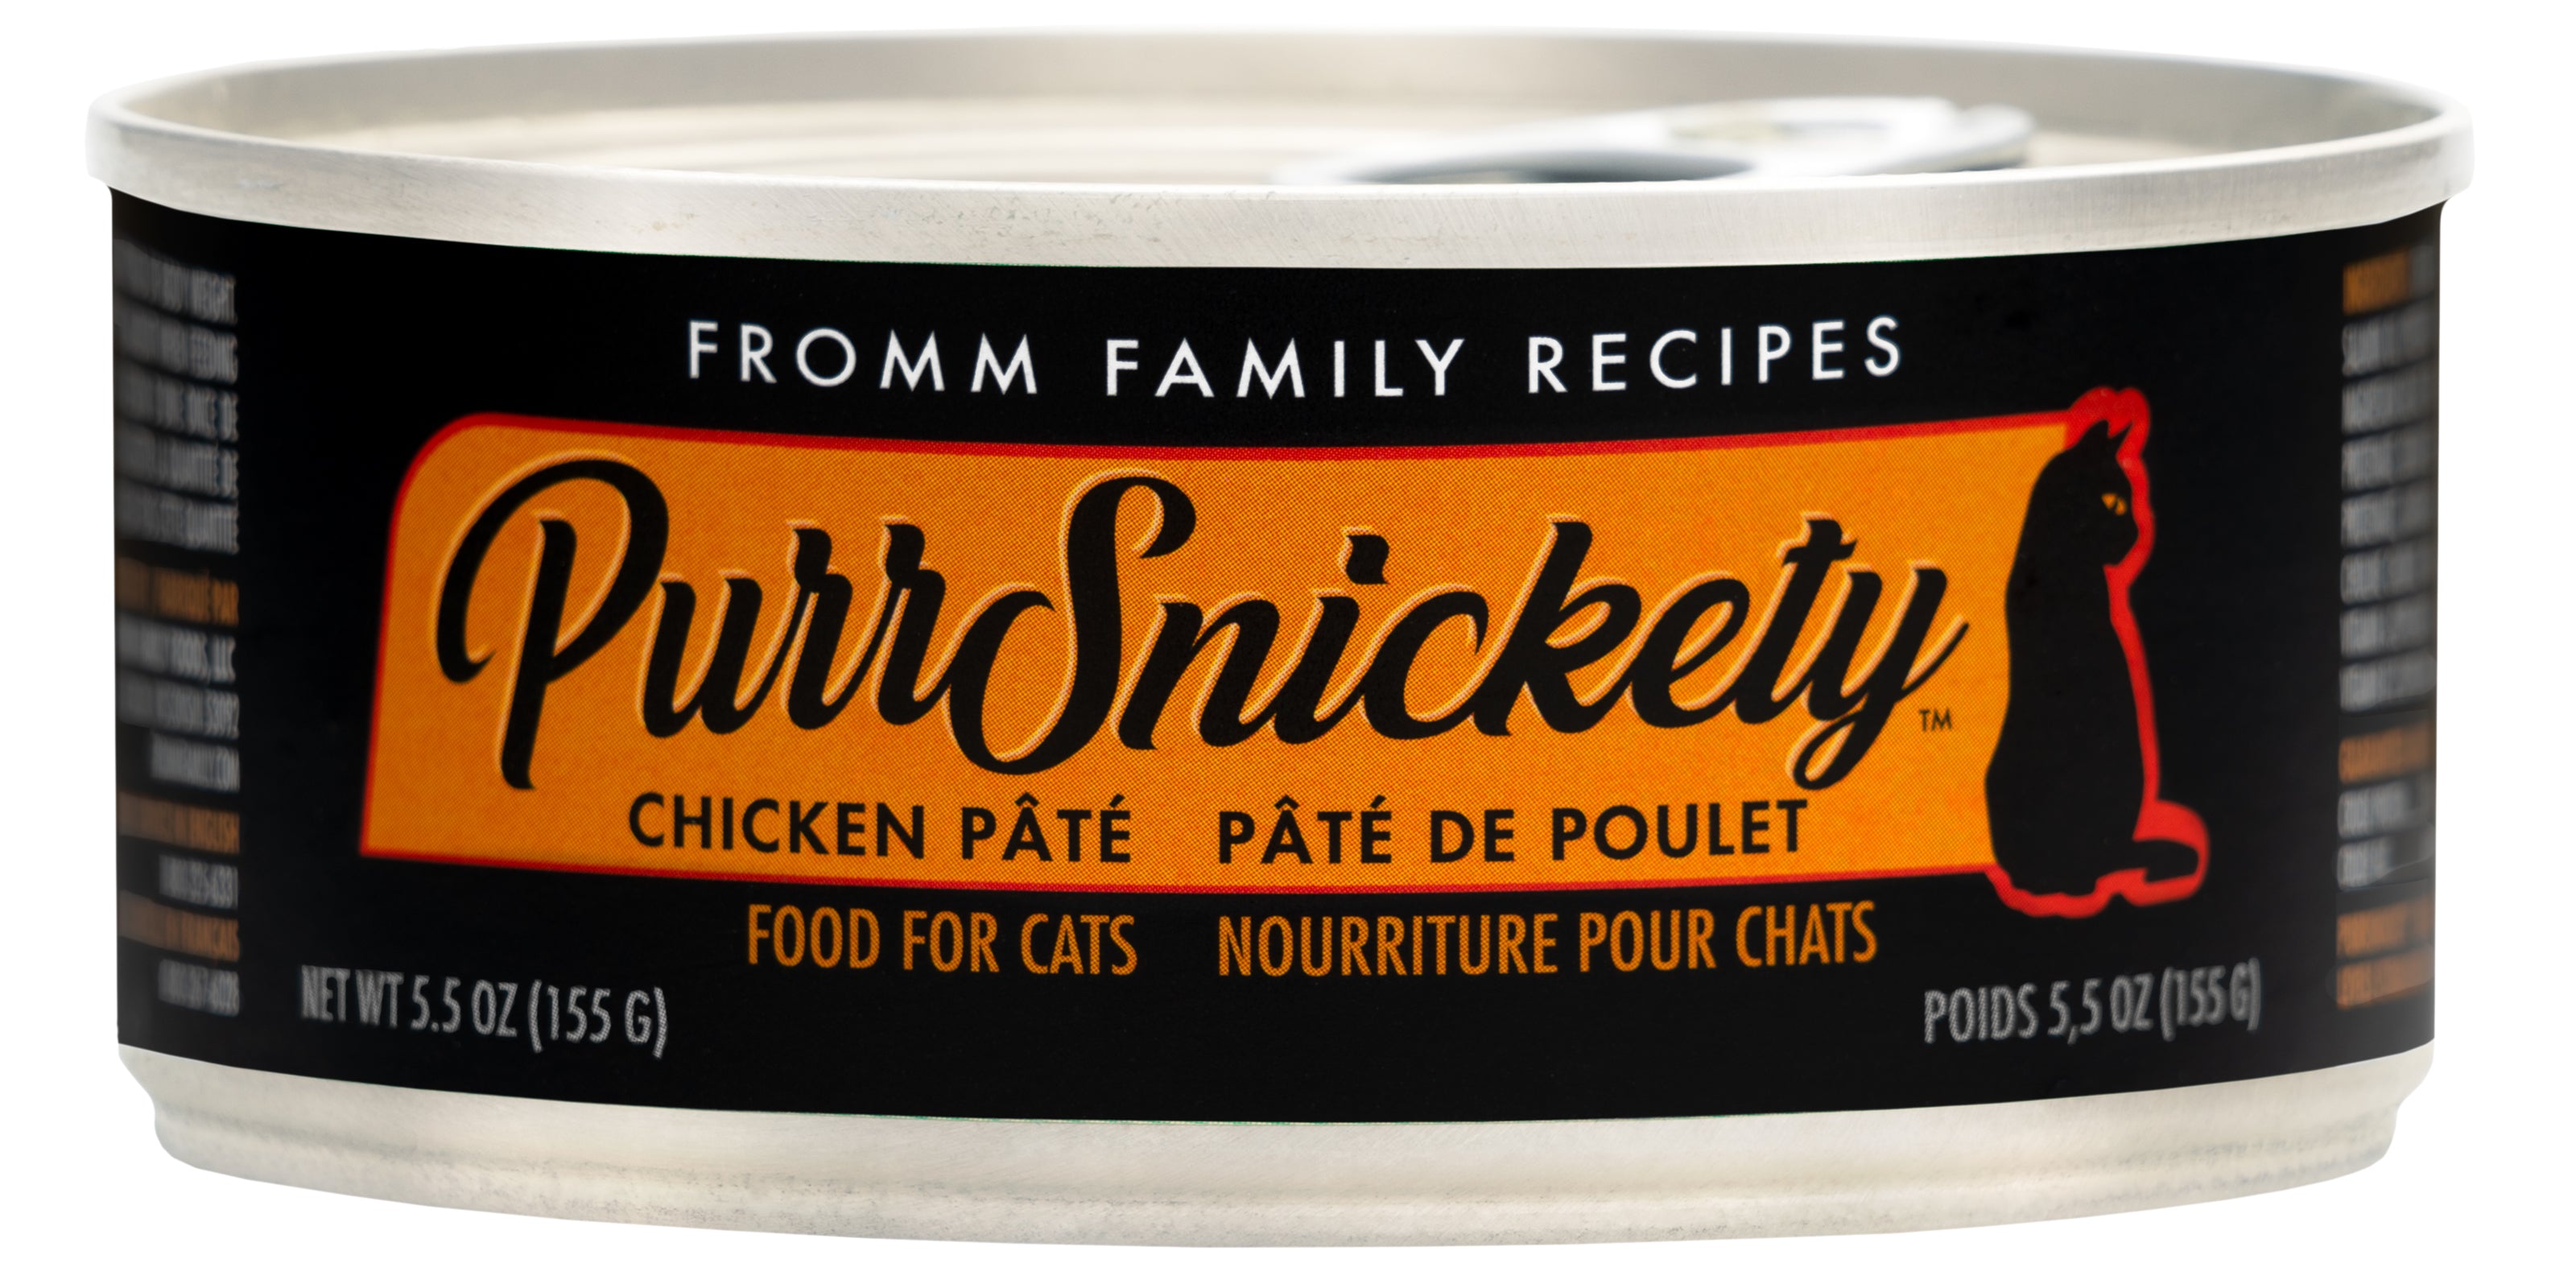 Fromm PurrSnickety Chicken Pate